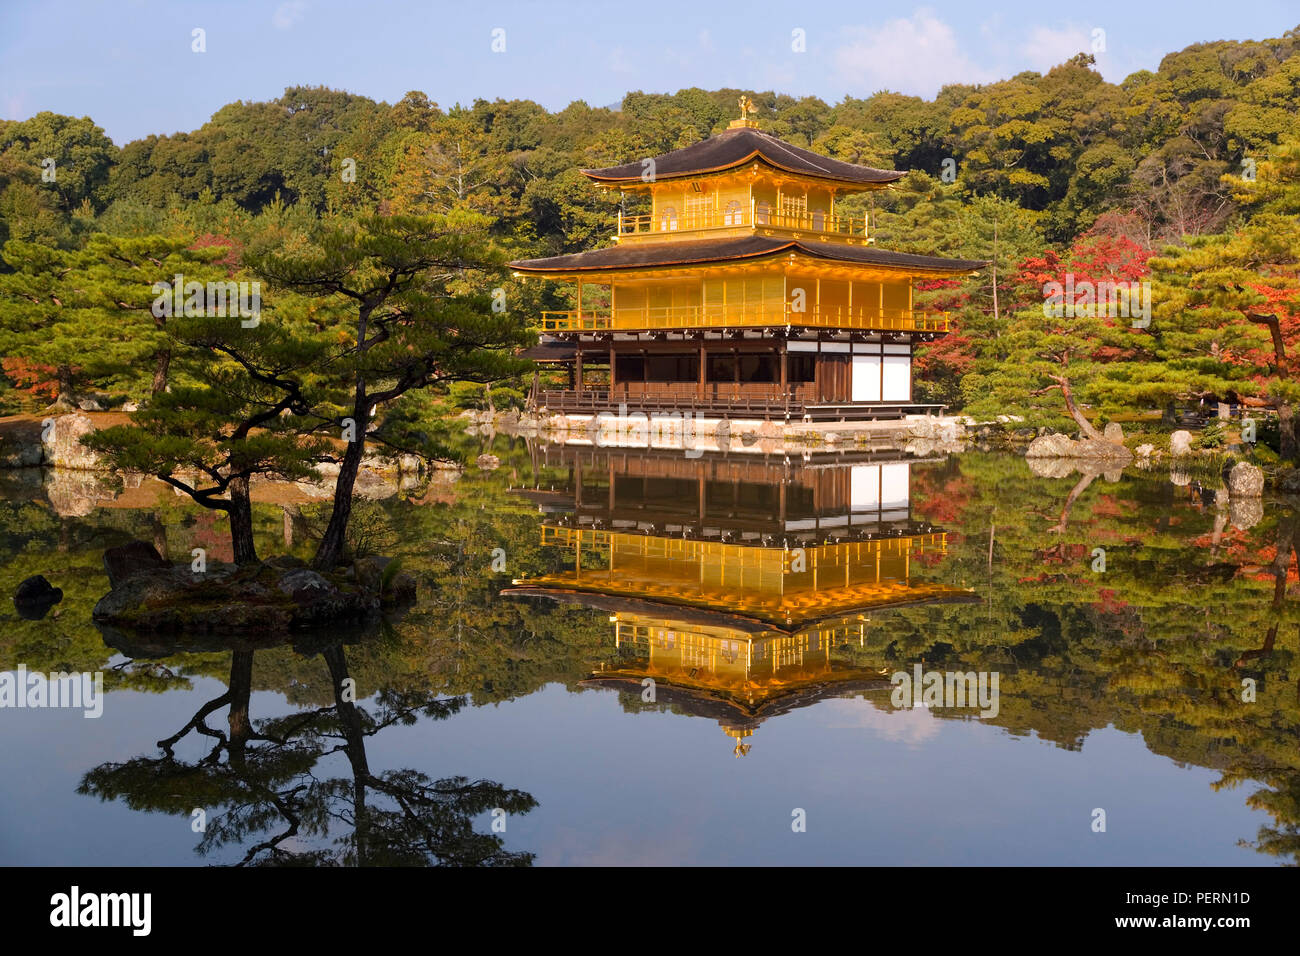 Asia, Japan, Honshu, Kansai Region, Kyoto, Kinkaku-ji or The Golden Pavilion,  one of Japan's best known sites the original building was constructed in  Stock Photo - Alamy